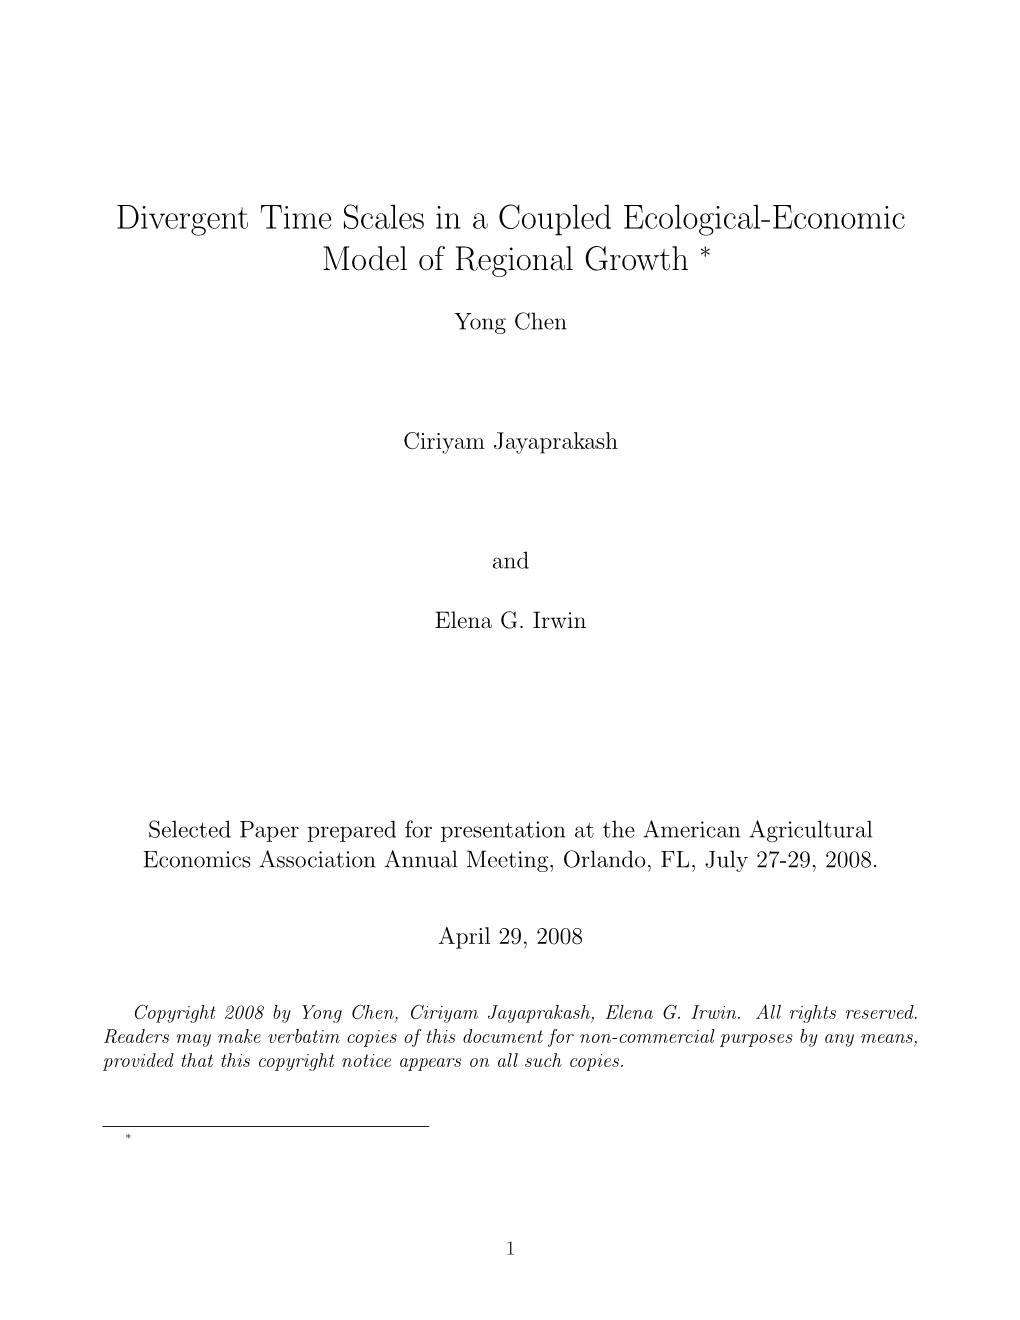 Divergent Time Scales in a Coupled Ecological-Economic Model of Regional Growth ∗